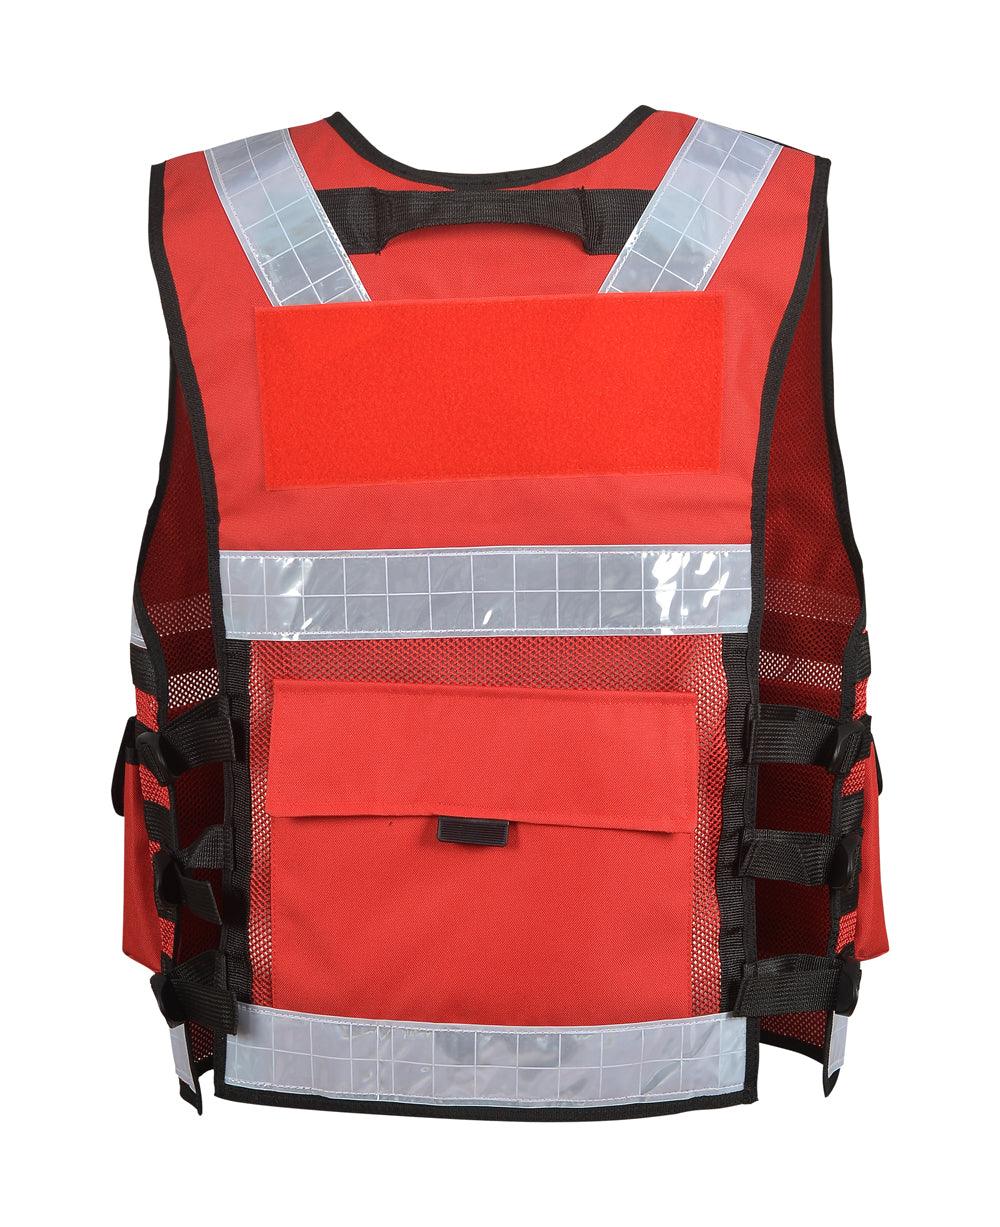 Suprelite Red Tactical Vest New with Tags Adjustable